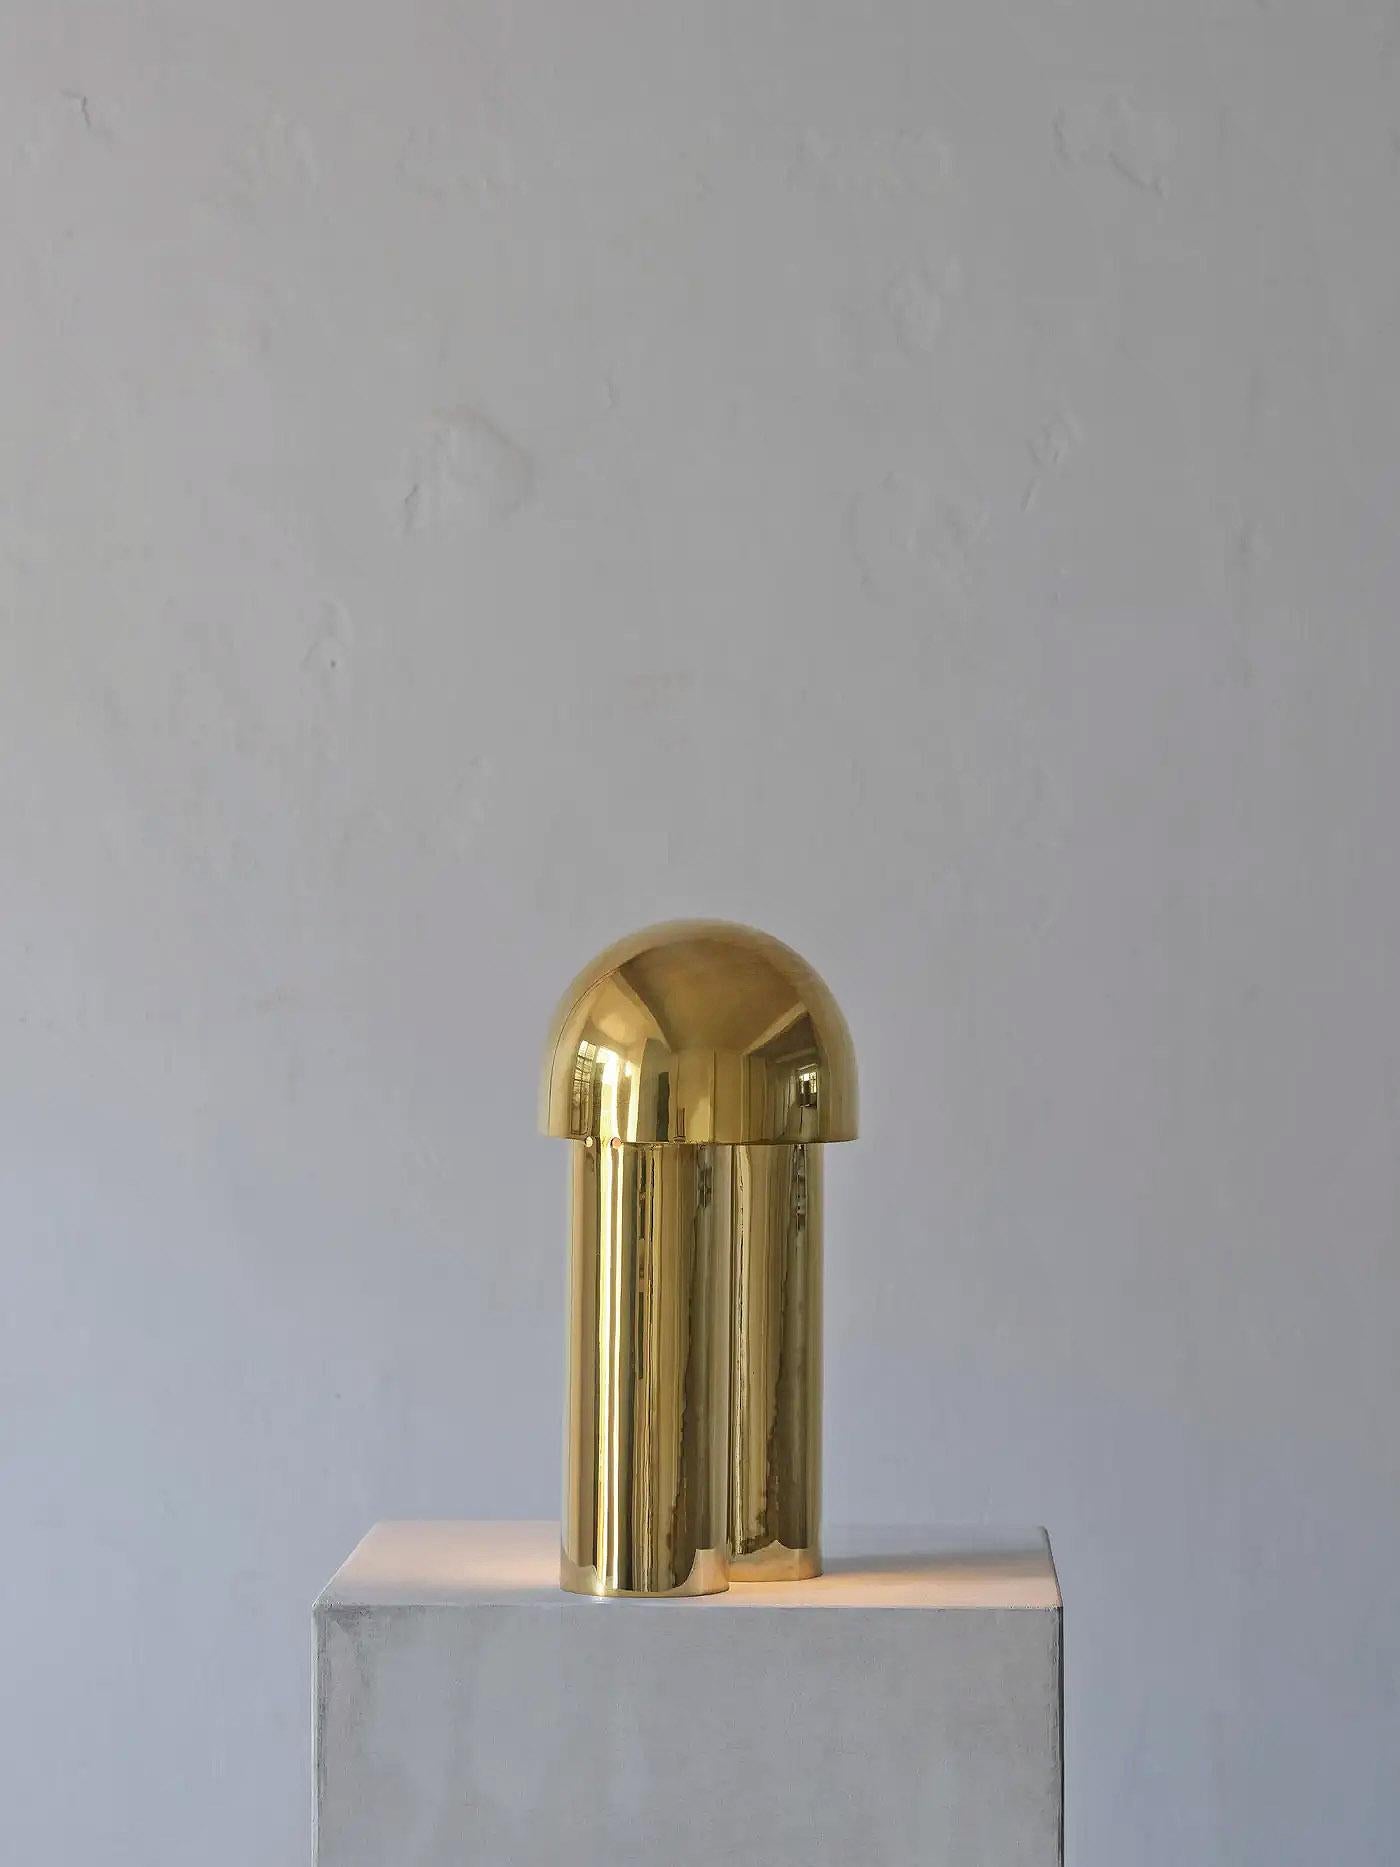 Contemporary Polished Brass Sculpted Table Lamp, Monolith Small by Paul Matter

The Monolith lamp is an exercise in reduction. Sculpted out of a single body with the help of simple scores and folds, the lamps geometry, surface texture and finish of